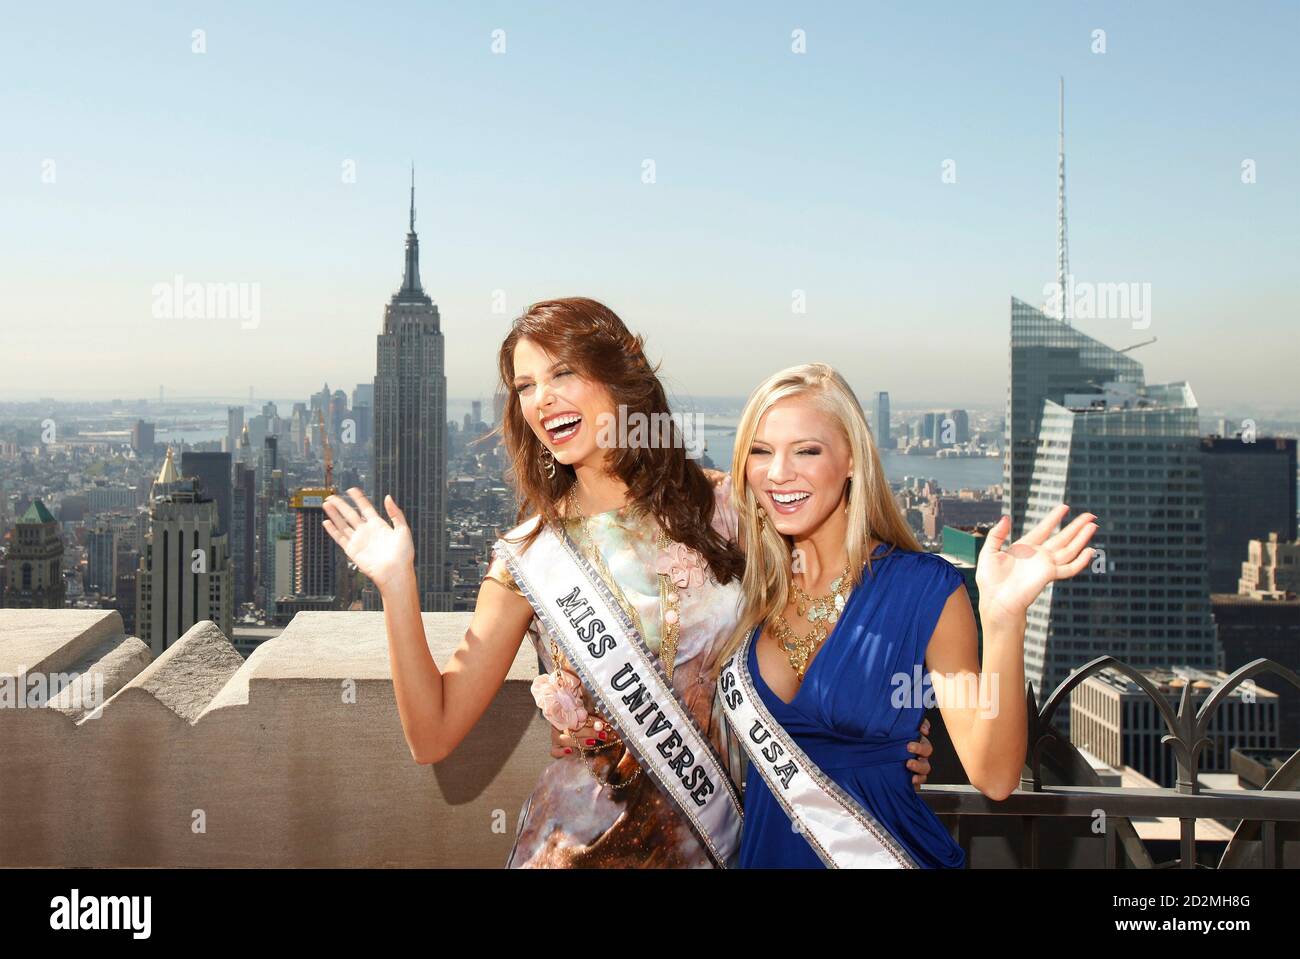 Miss Universe, Stefania Fernandez, of Venezuela and Miss USA, Kristen  Dalton (R), smile while posing for photographers on the "Top of the Rock"  observation deck at the Rockefeller Center in New York